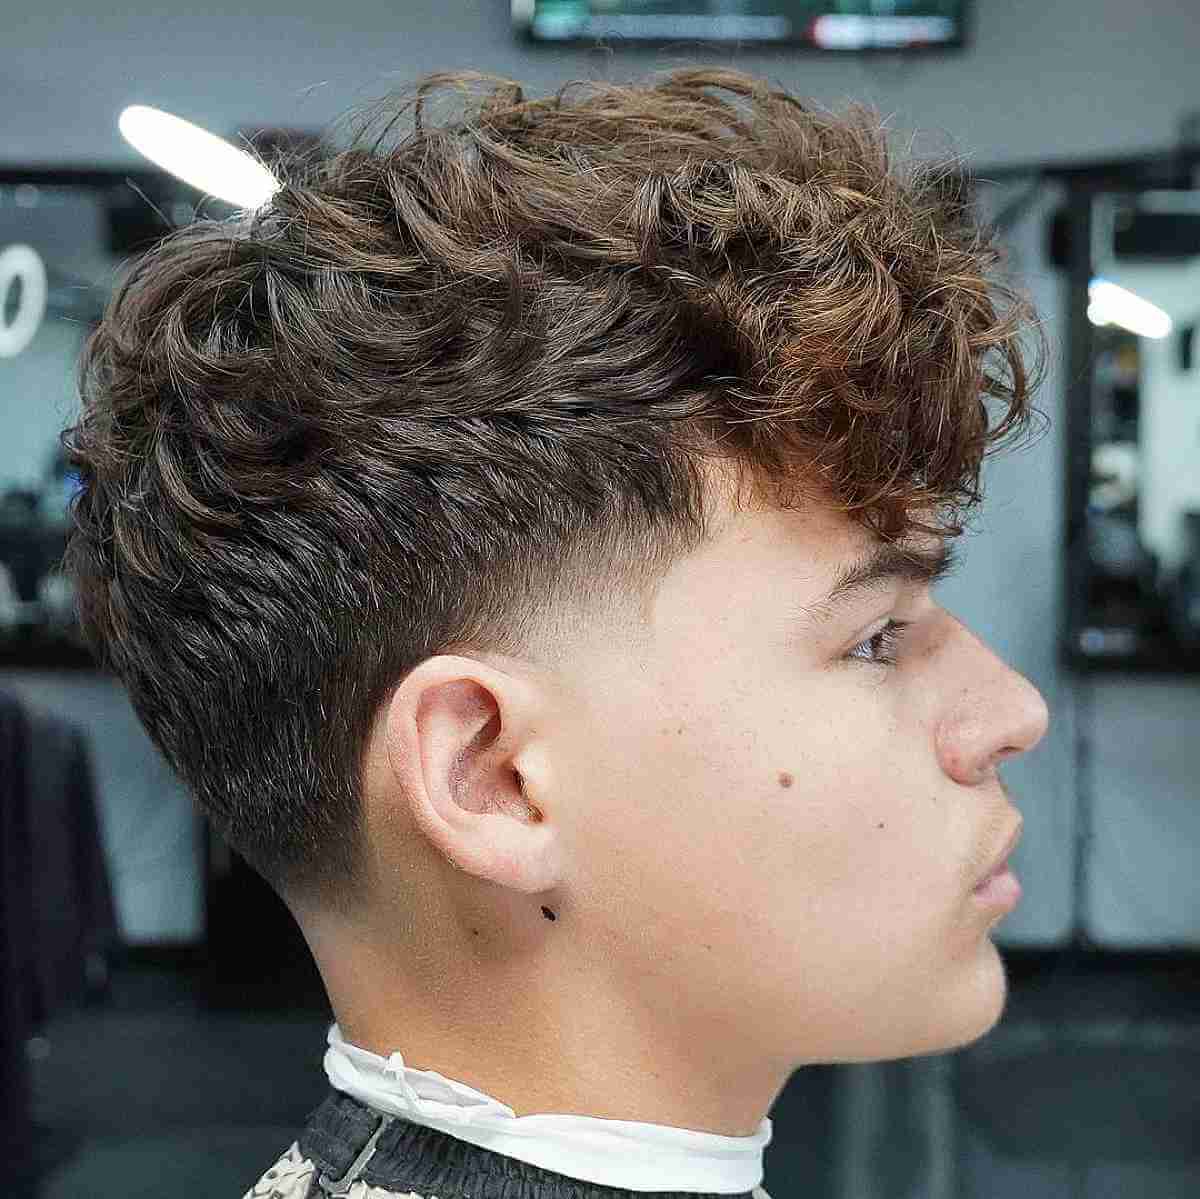 Taper Fade Haircut with Tousled Curls